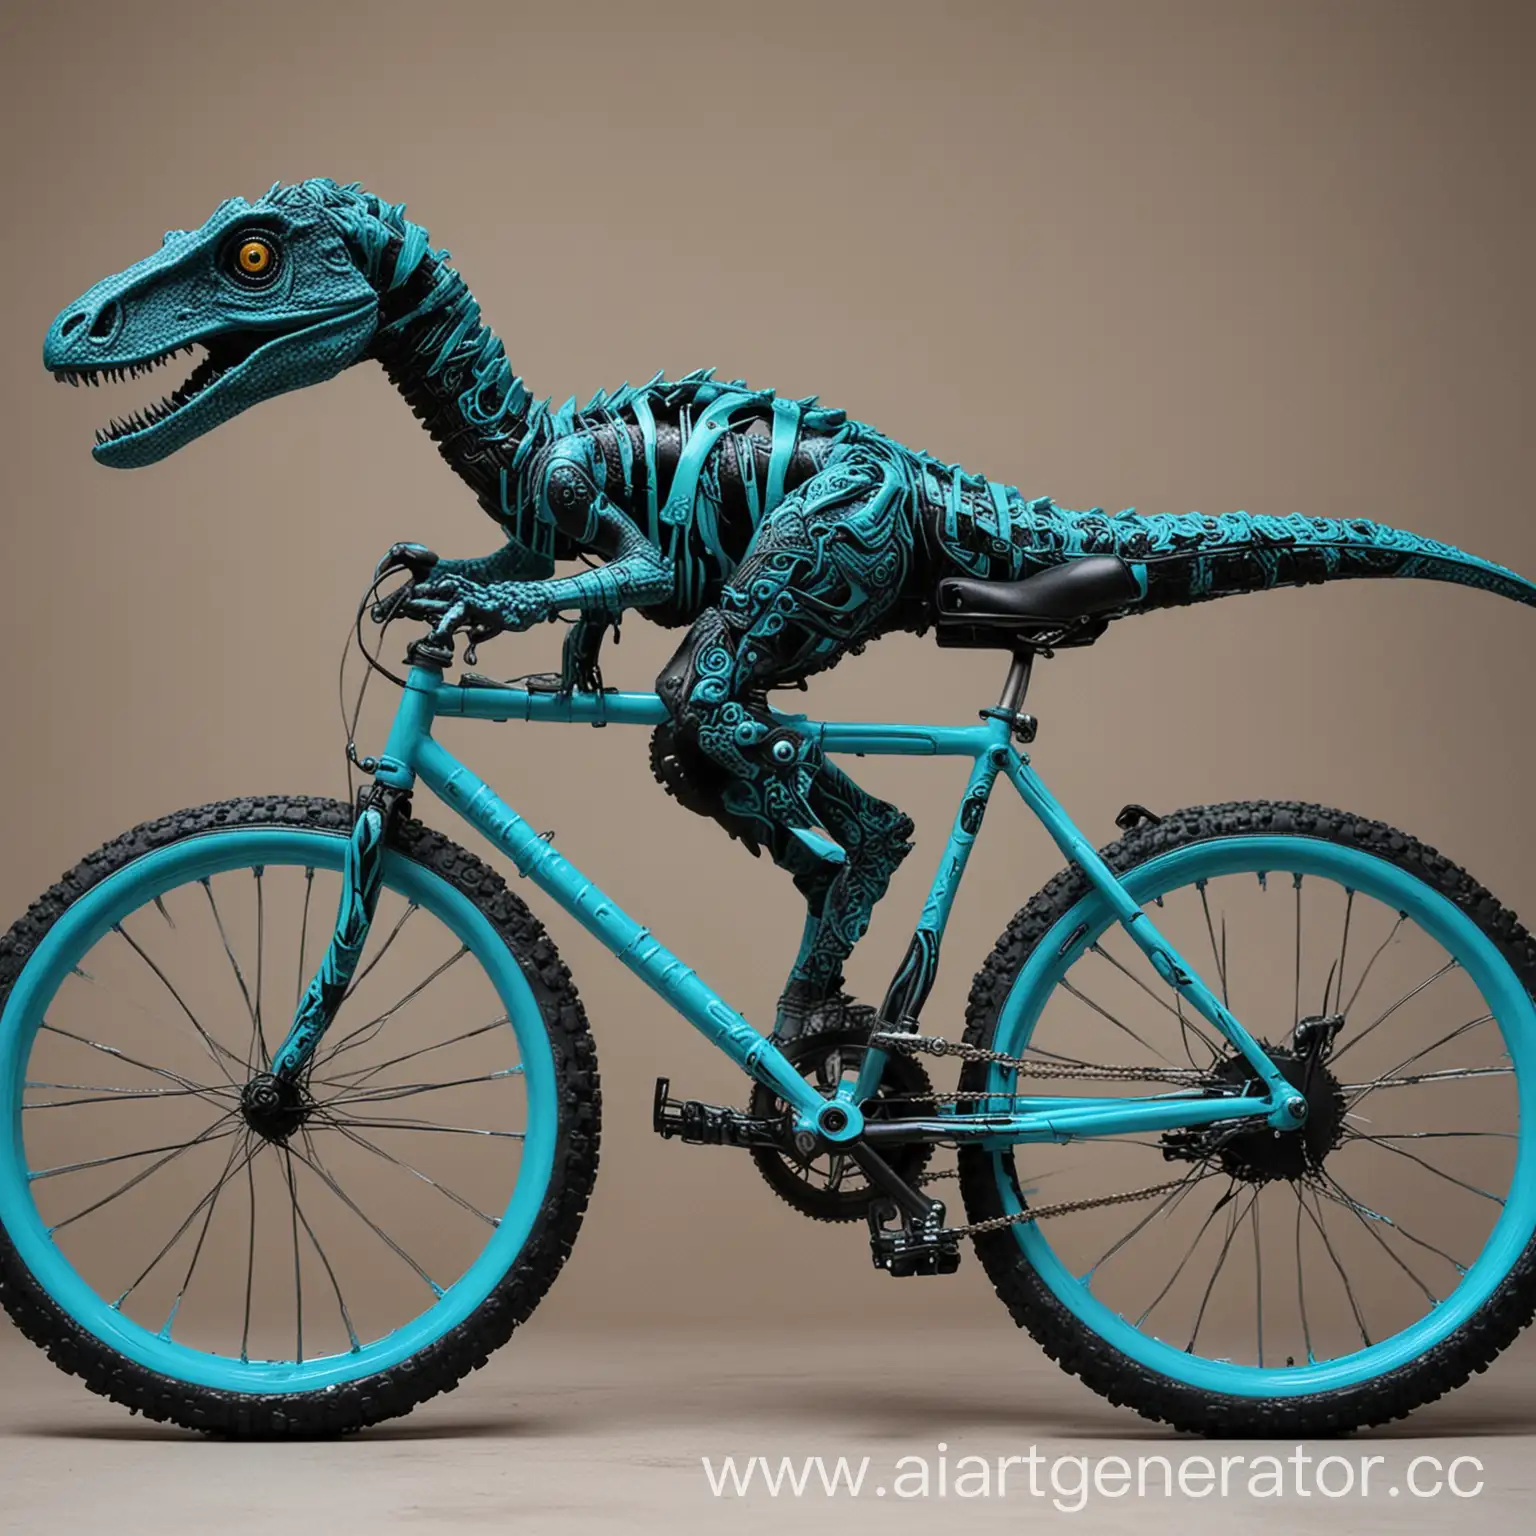 Velociraptor-Riding-a-Black-and-Turquoise-Bike